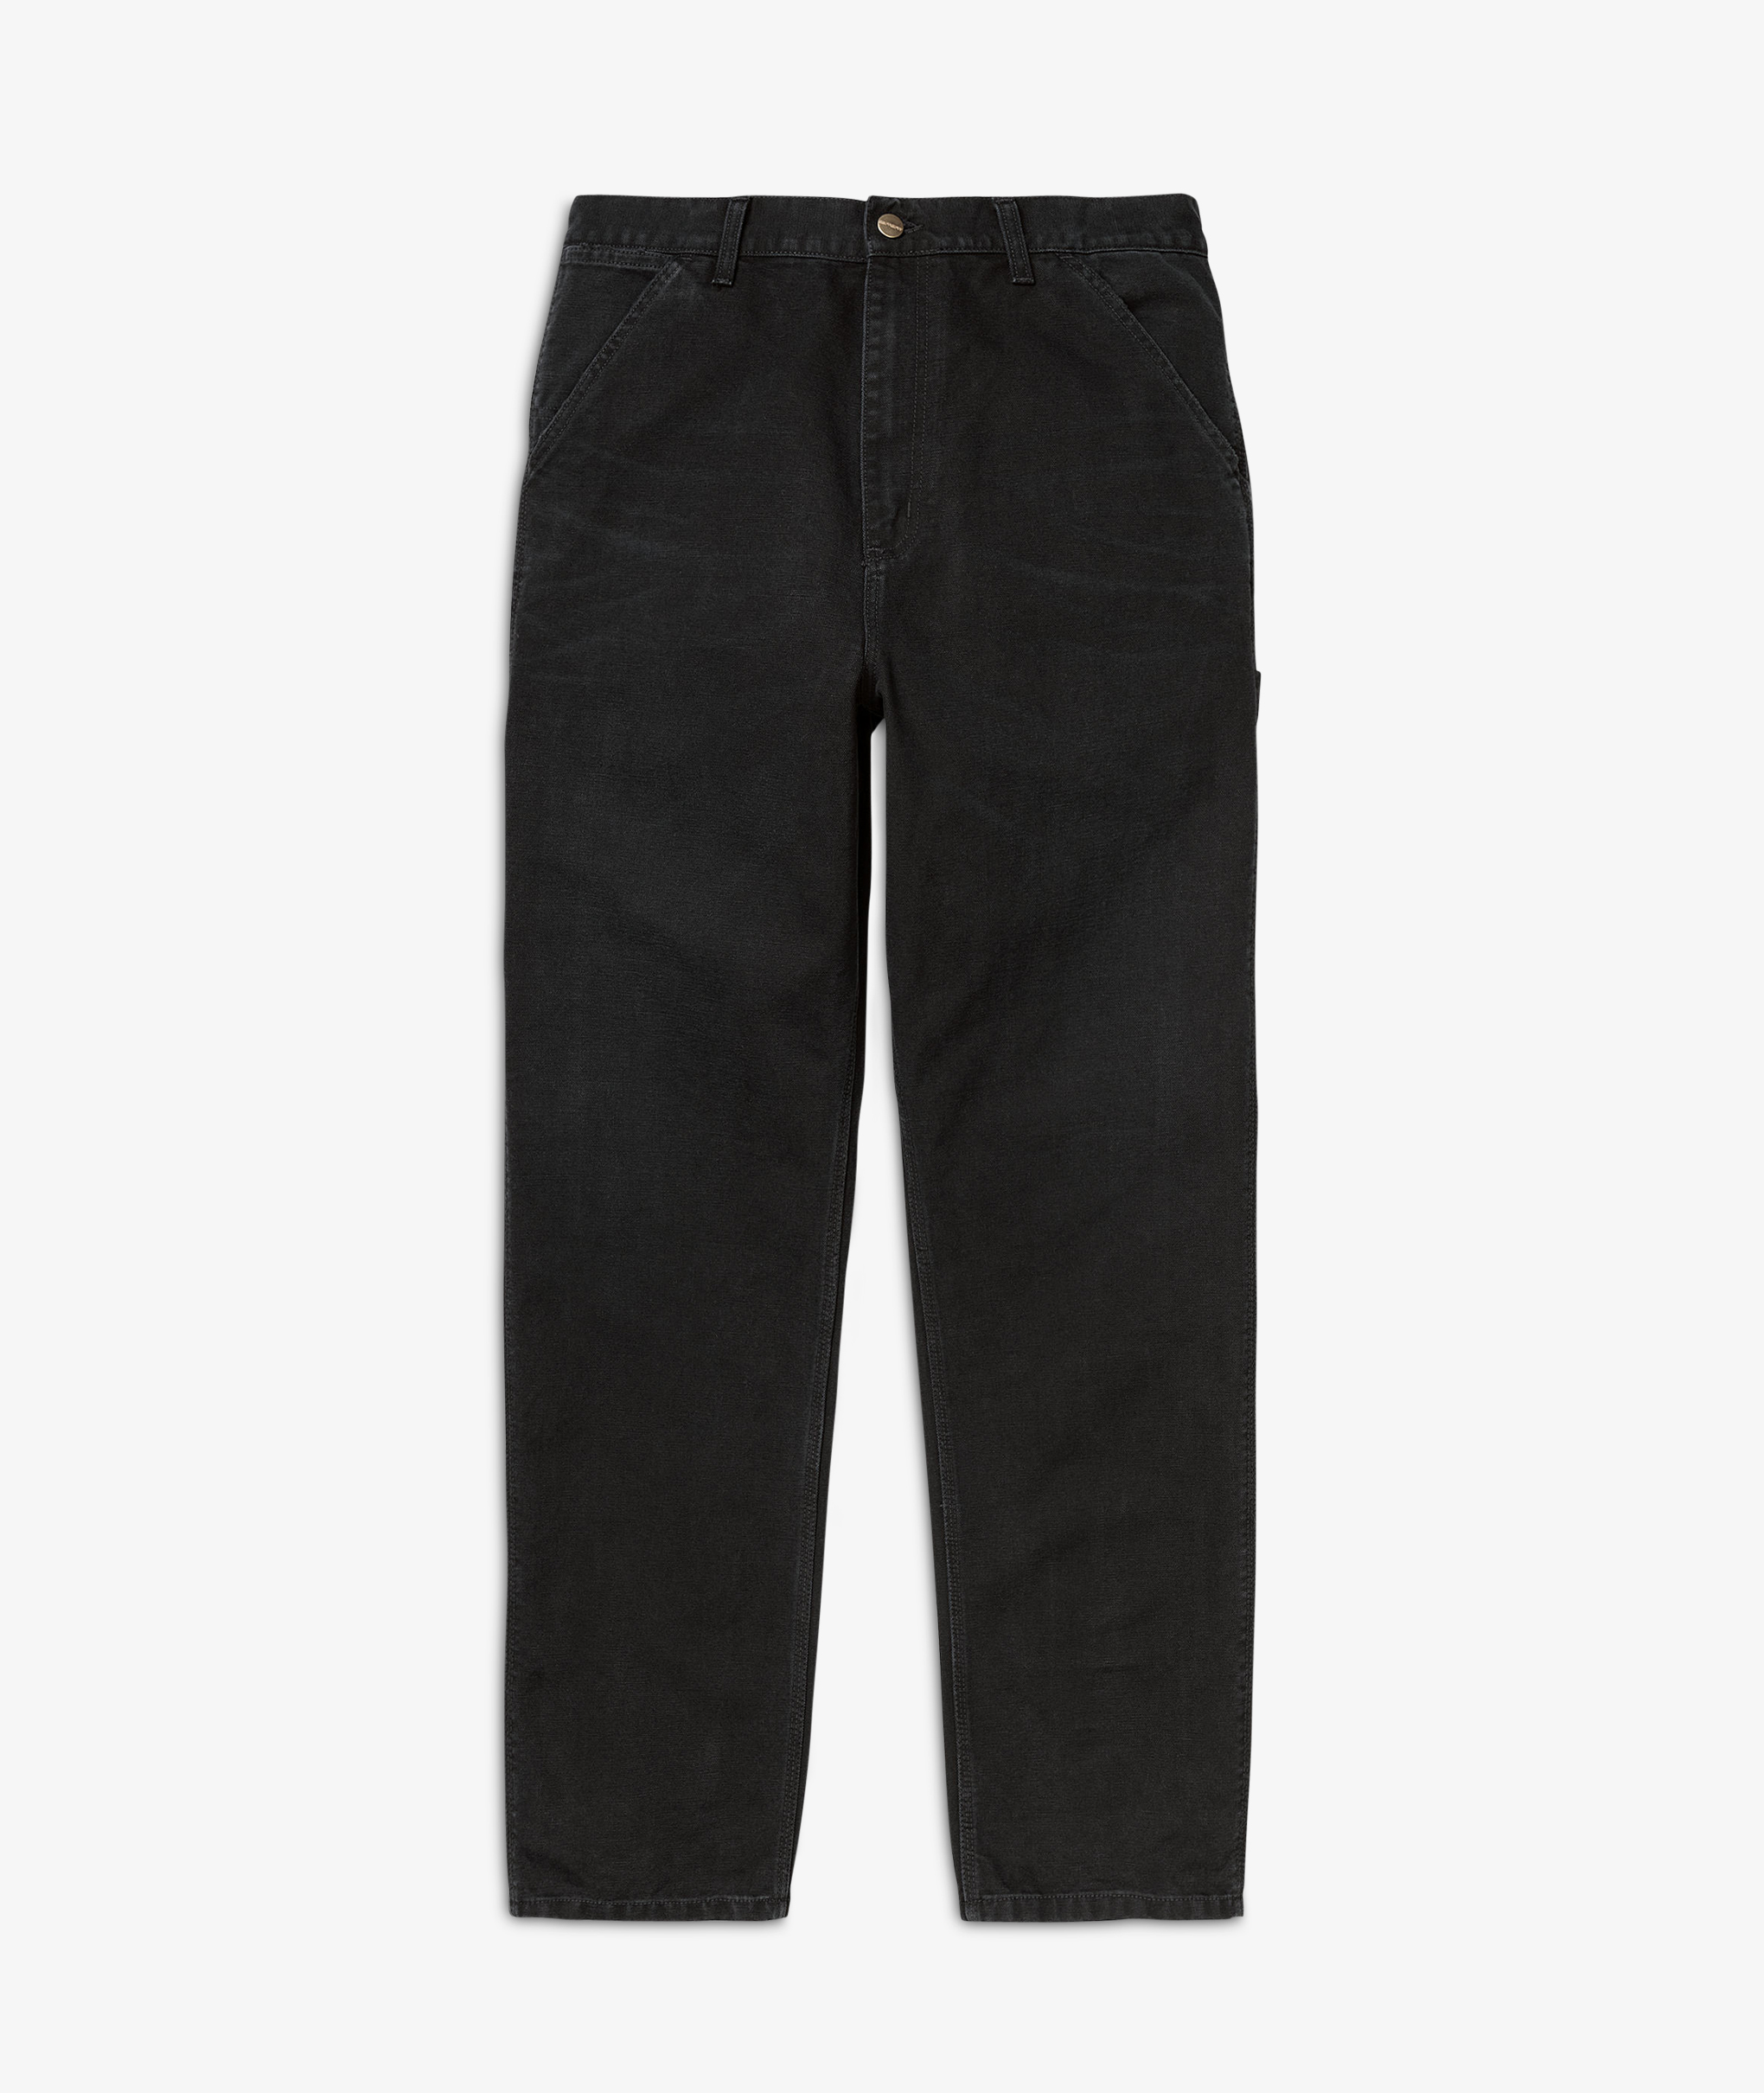 Norse Store  Shipping Worldwide - Carhartt WIP Single Knee Pant - Black  Aged Canvas